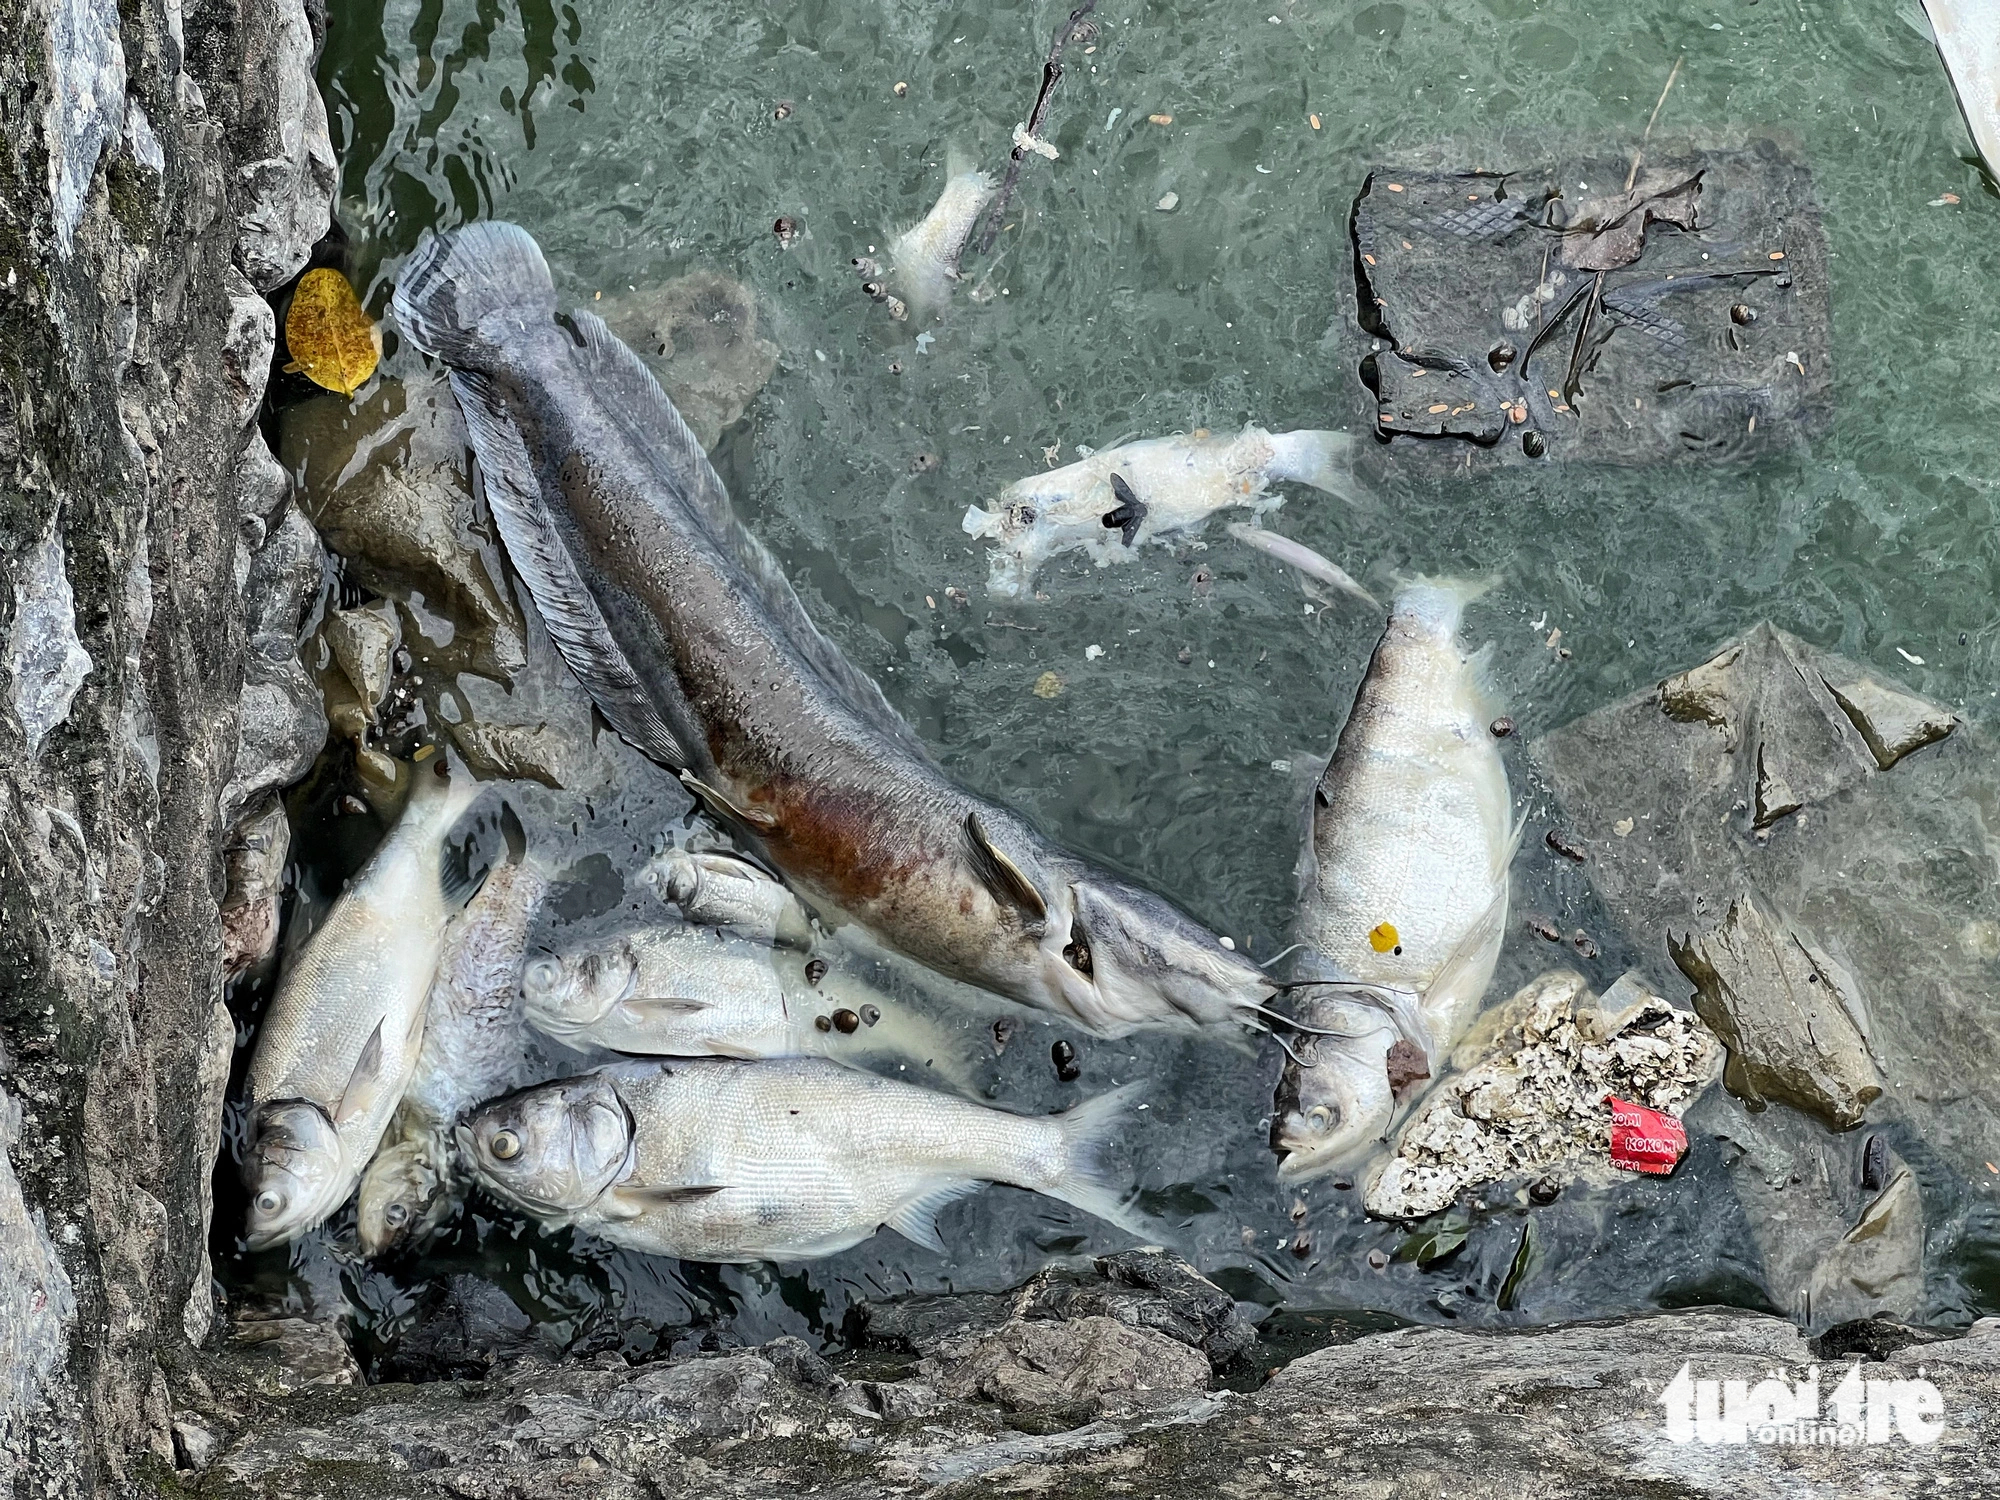 Dead fish found floating in Hanoi’s West Lake during season change